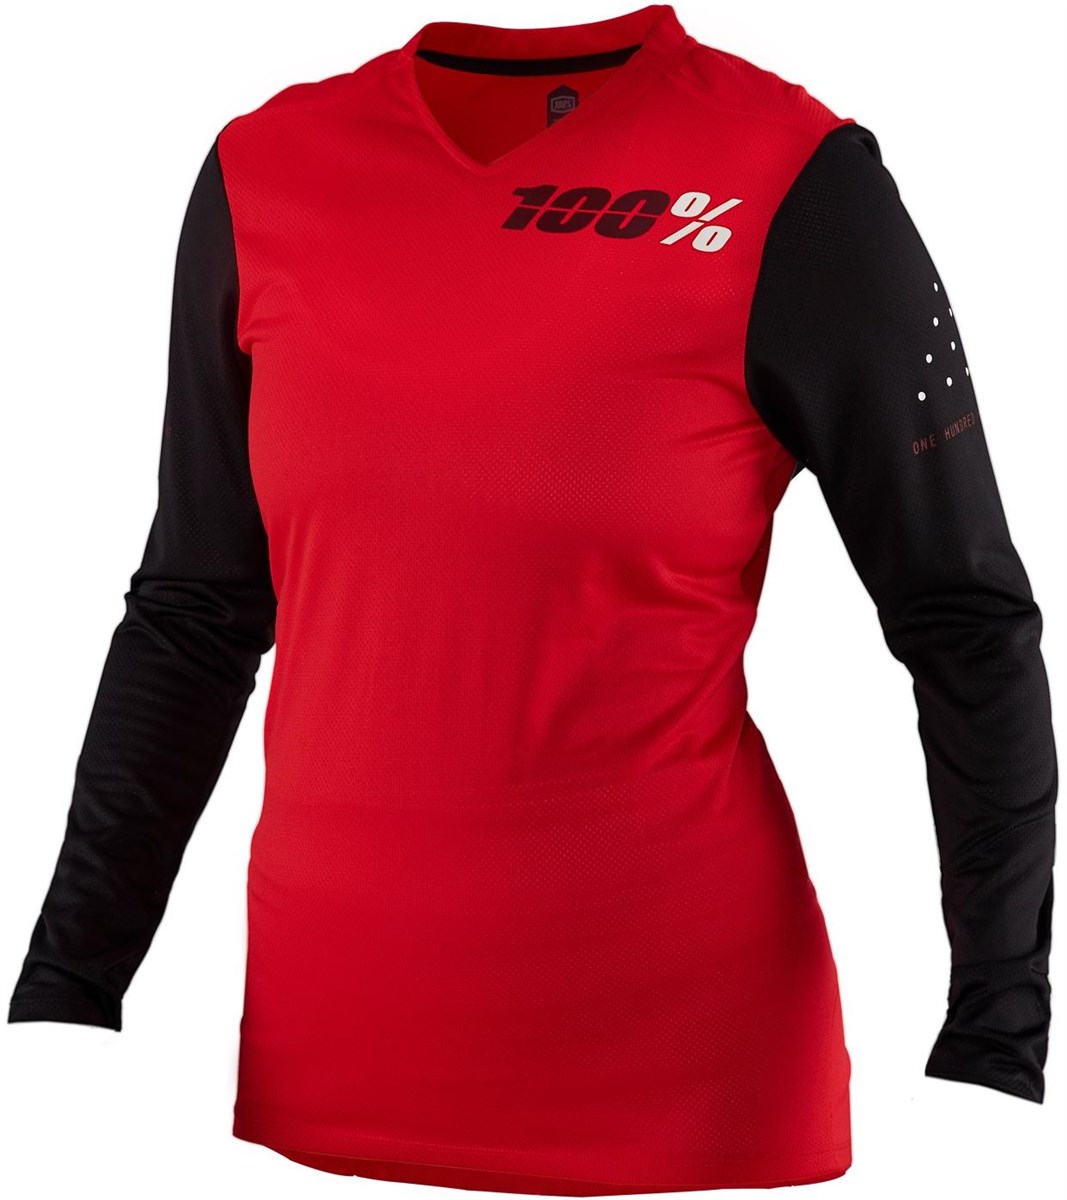 100% Ridecamp Womens Long Sleeve Jersey product image